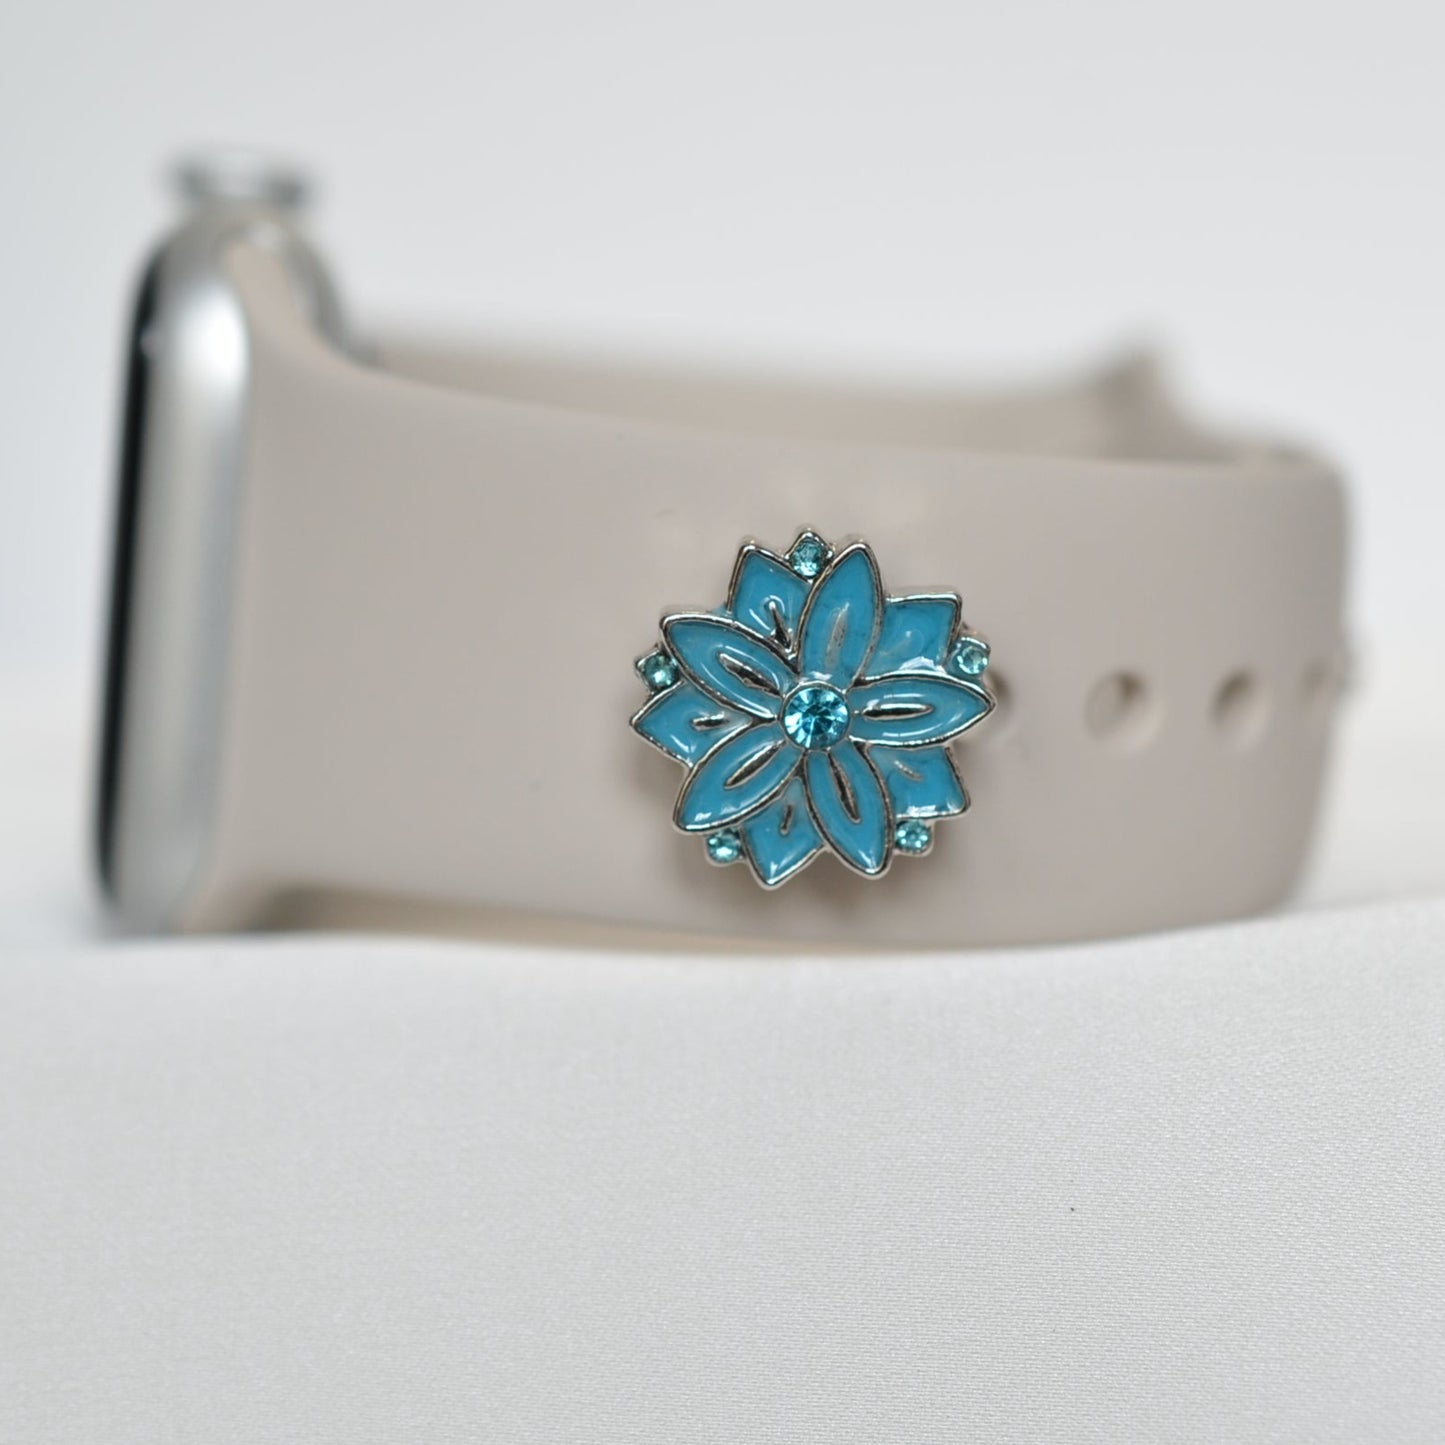 Blue Flower Charm for Belt, Bag and Watch Bands